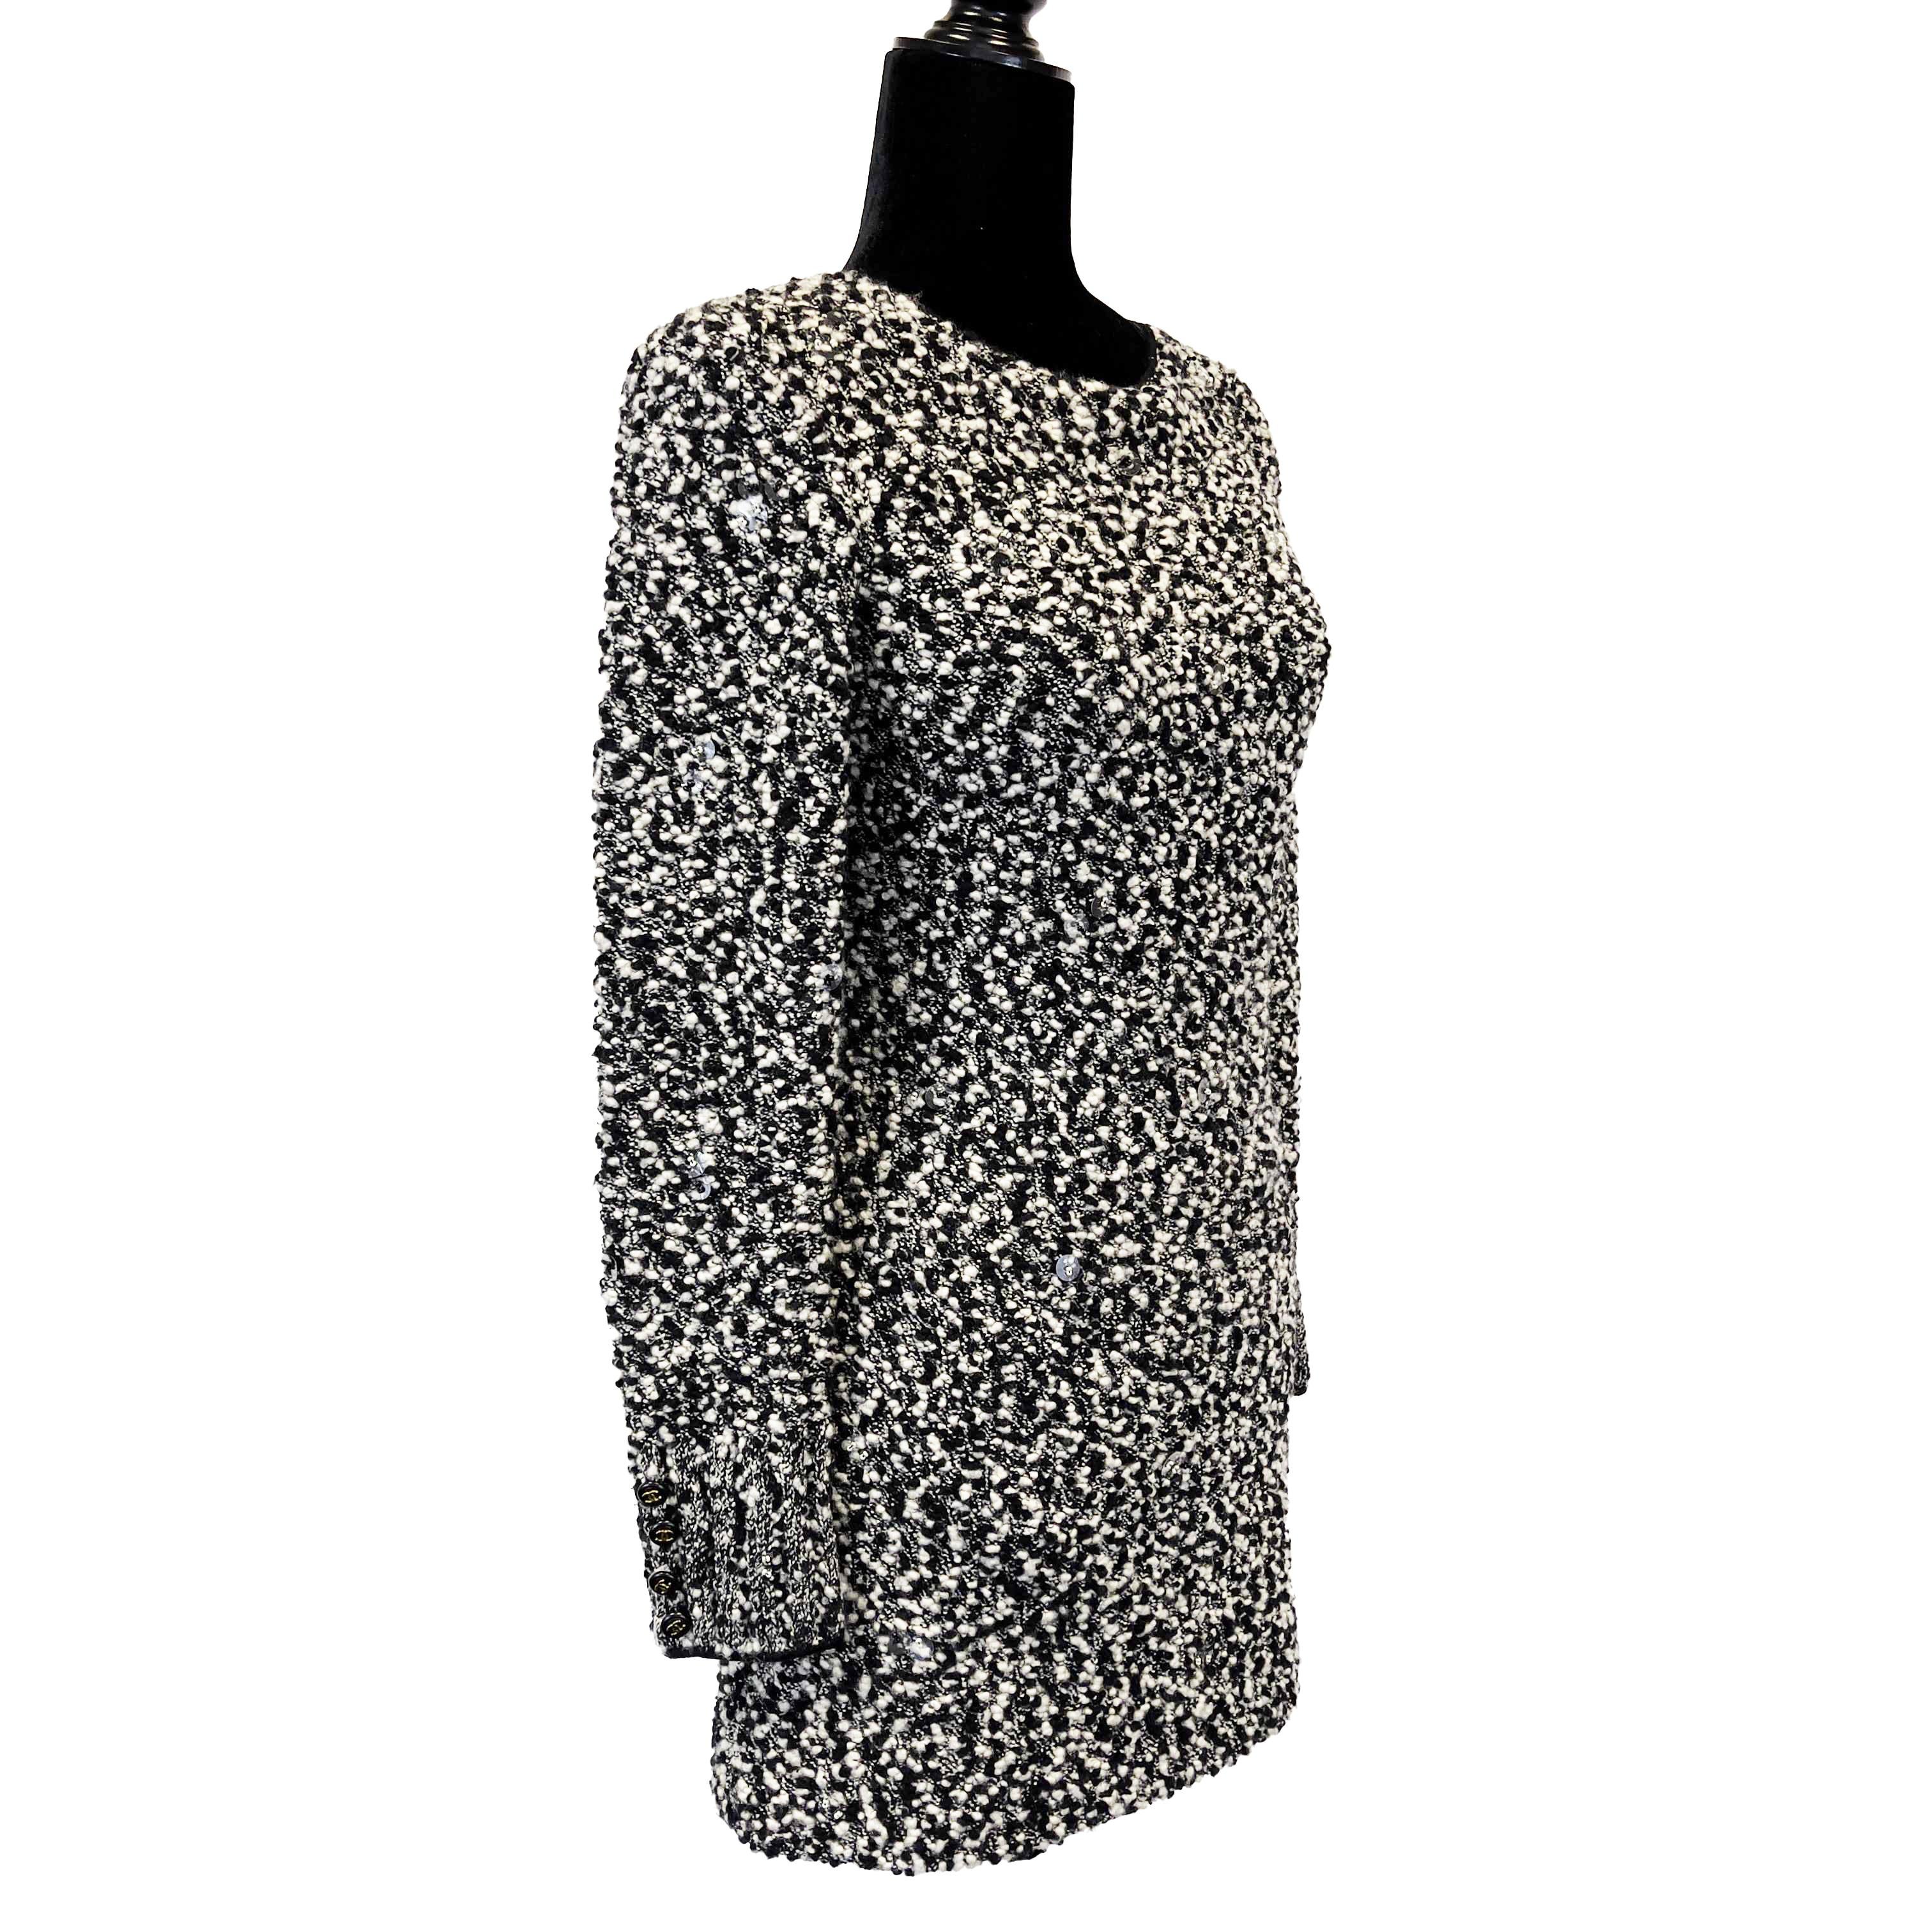 	CHANEL - 94A Knit Clear Sequin Dress - Black & White - 38 US 6 For Sale 5